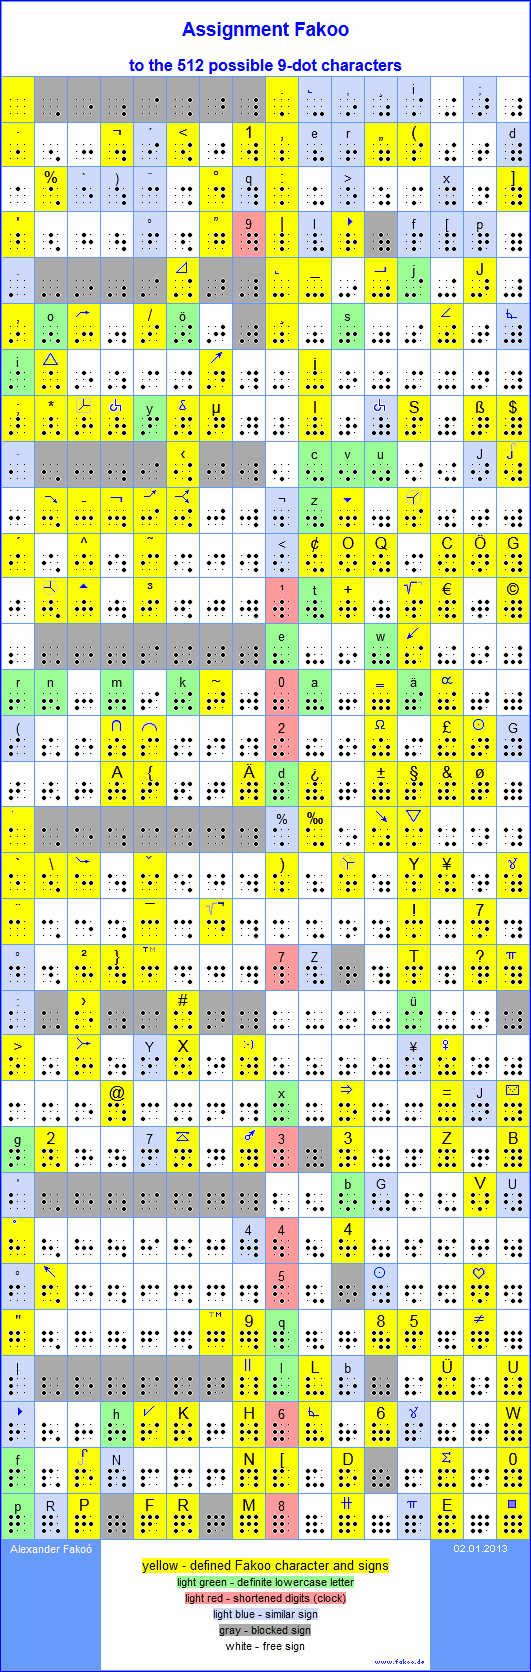 Representation of all 512 possible 9-dot characters